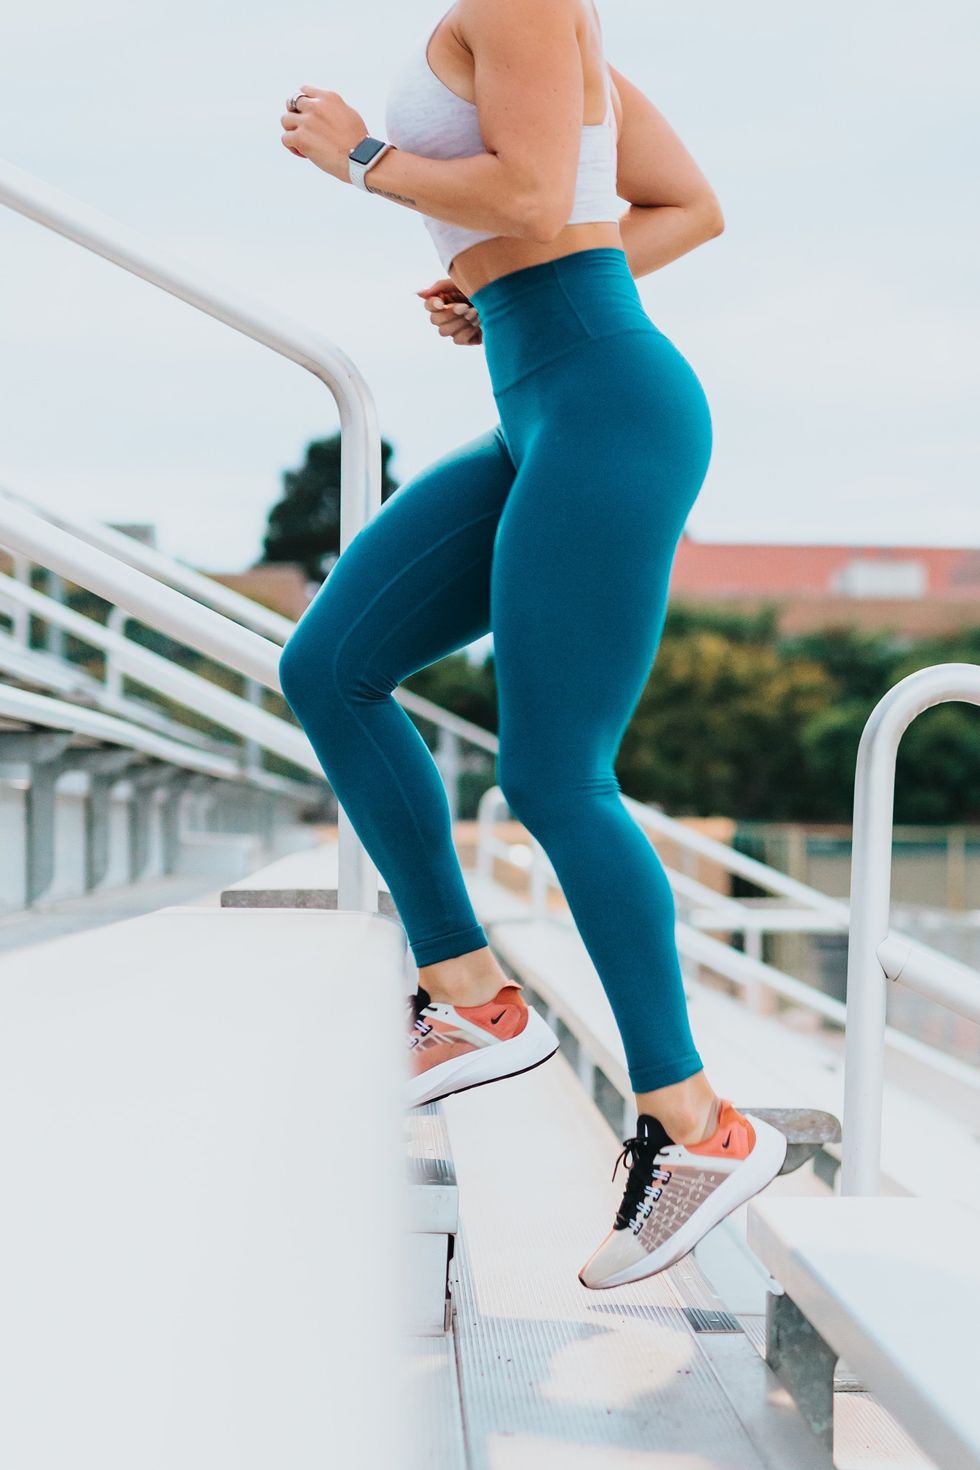 Woman jogging up a flight of steps for a cardio workout